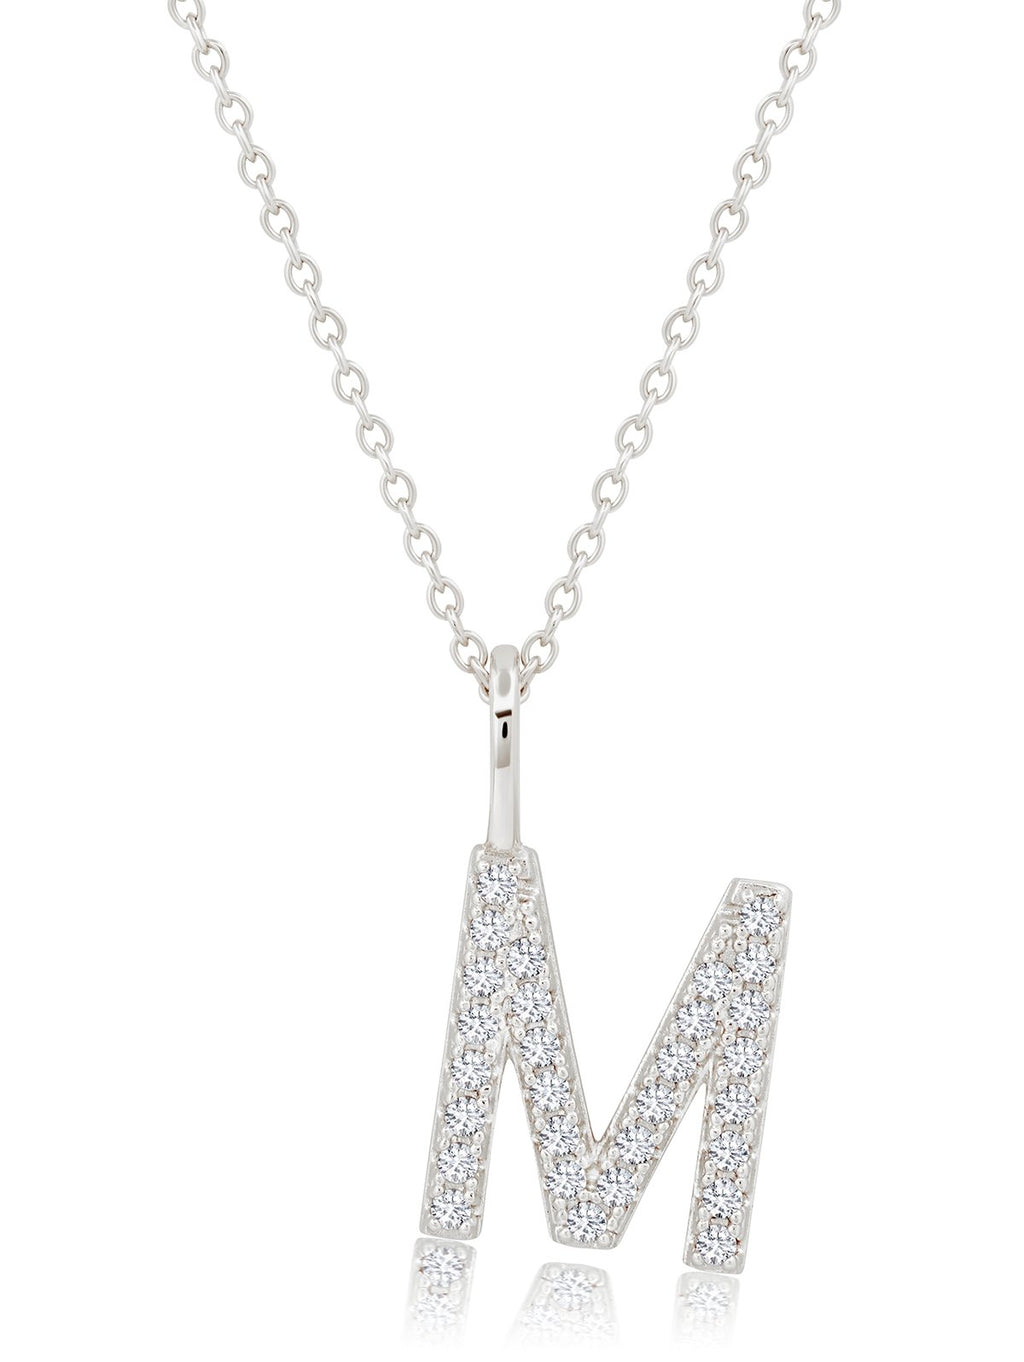 Initial Pendant Necklace Charm Letter M Finished in Pure Platinum